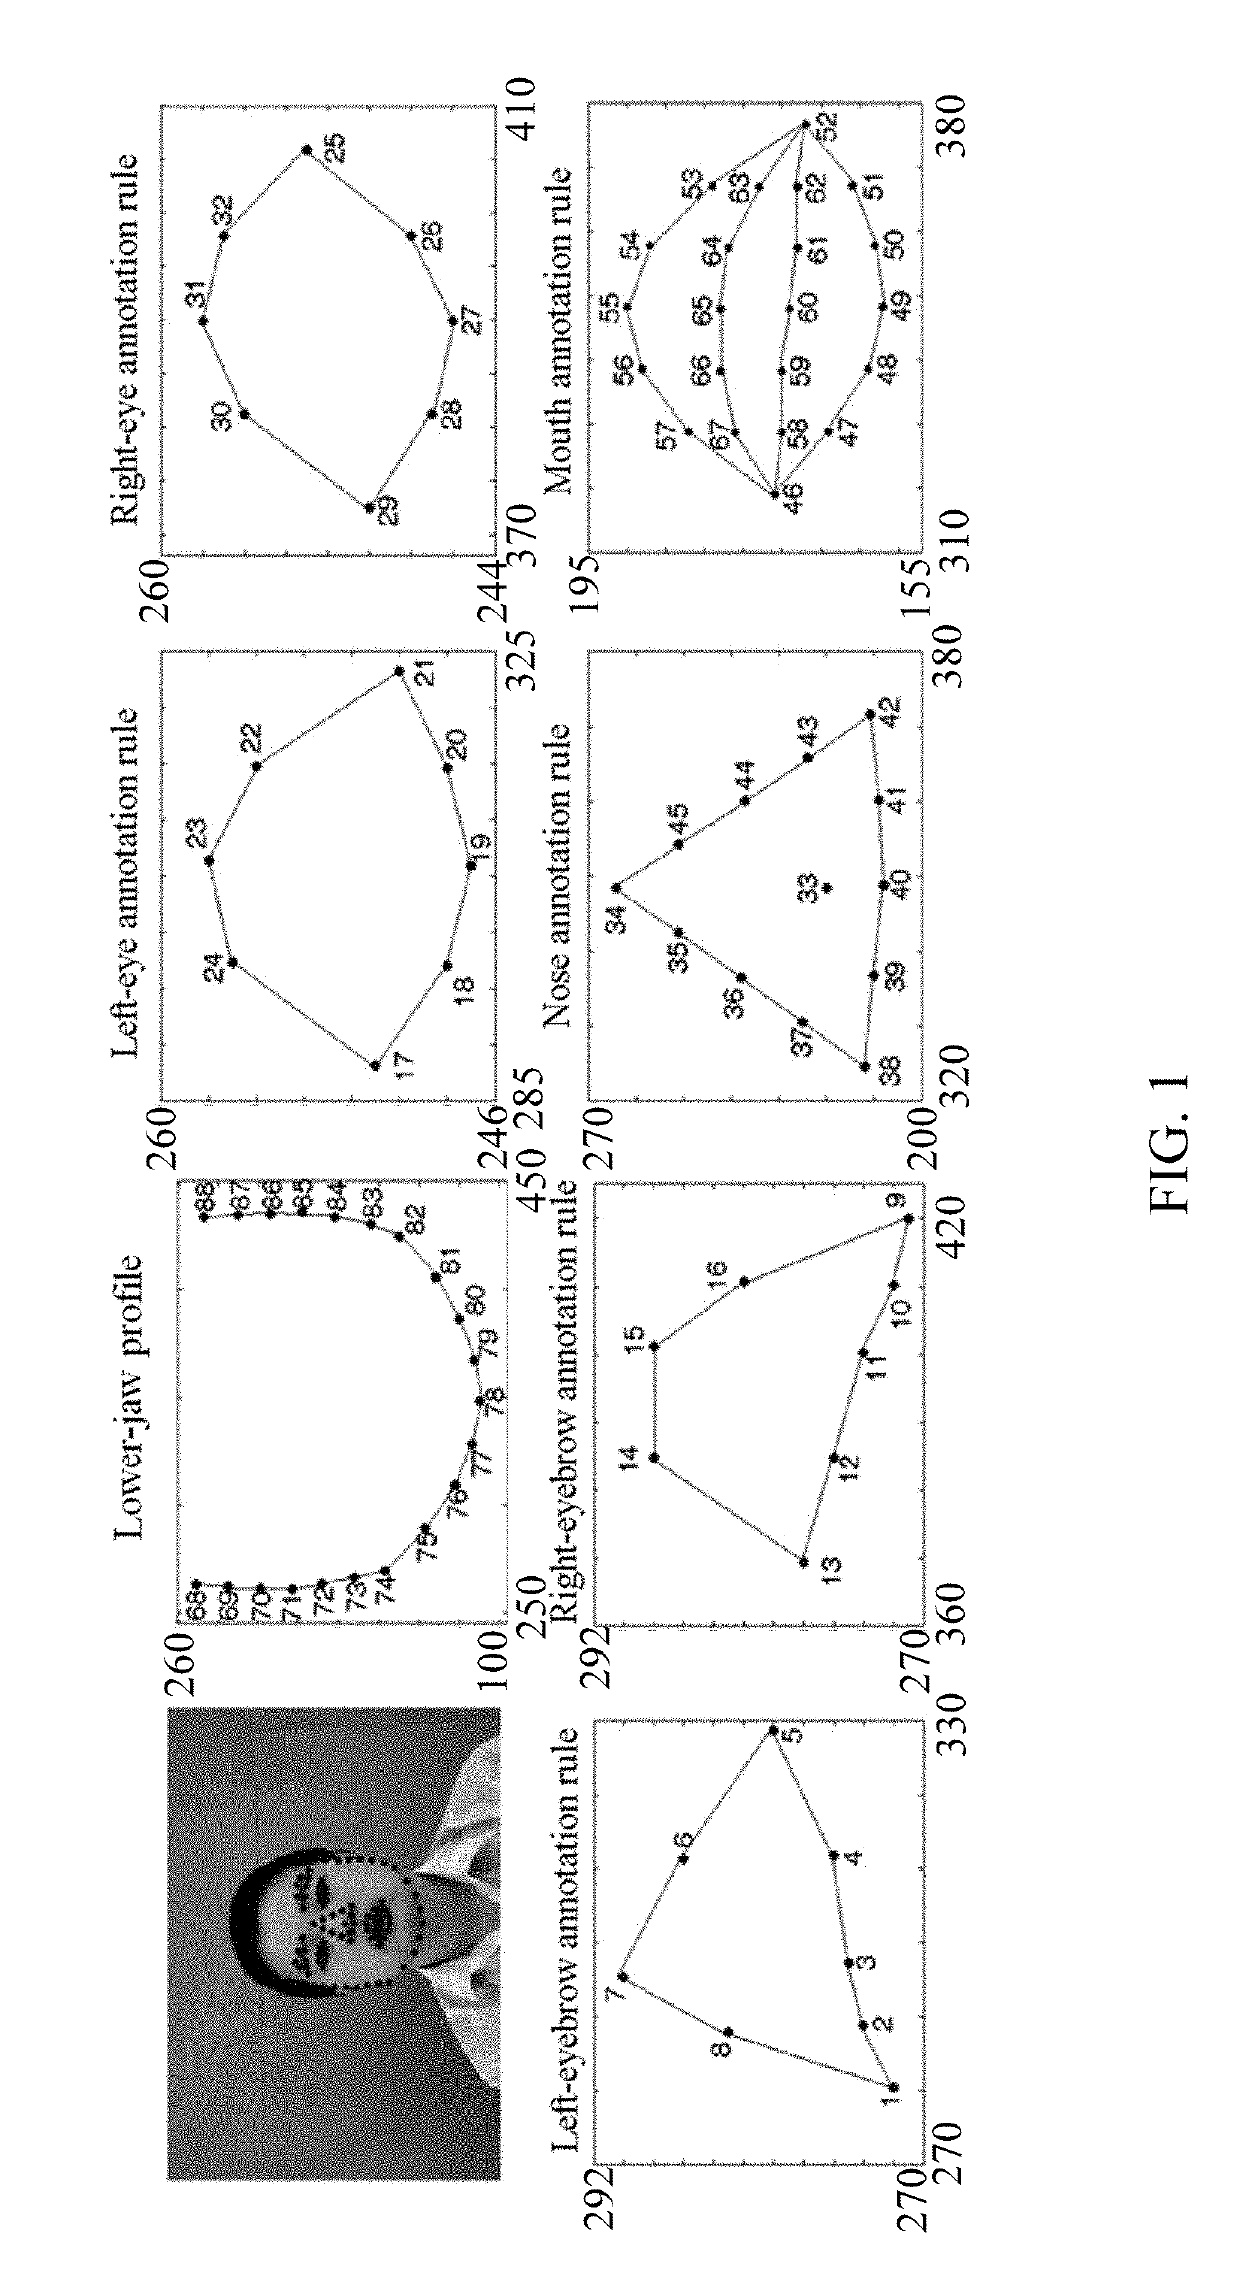 Facial tracking method and apparatus, storage medium, and electronic device